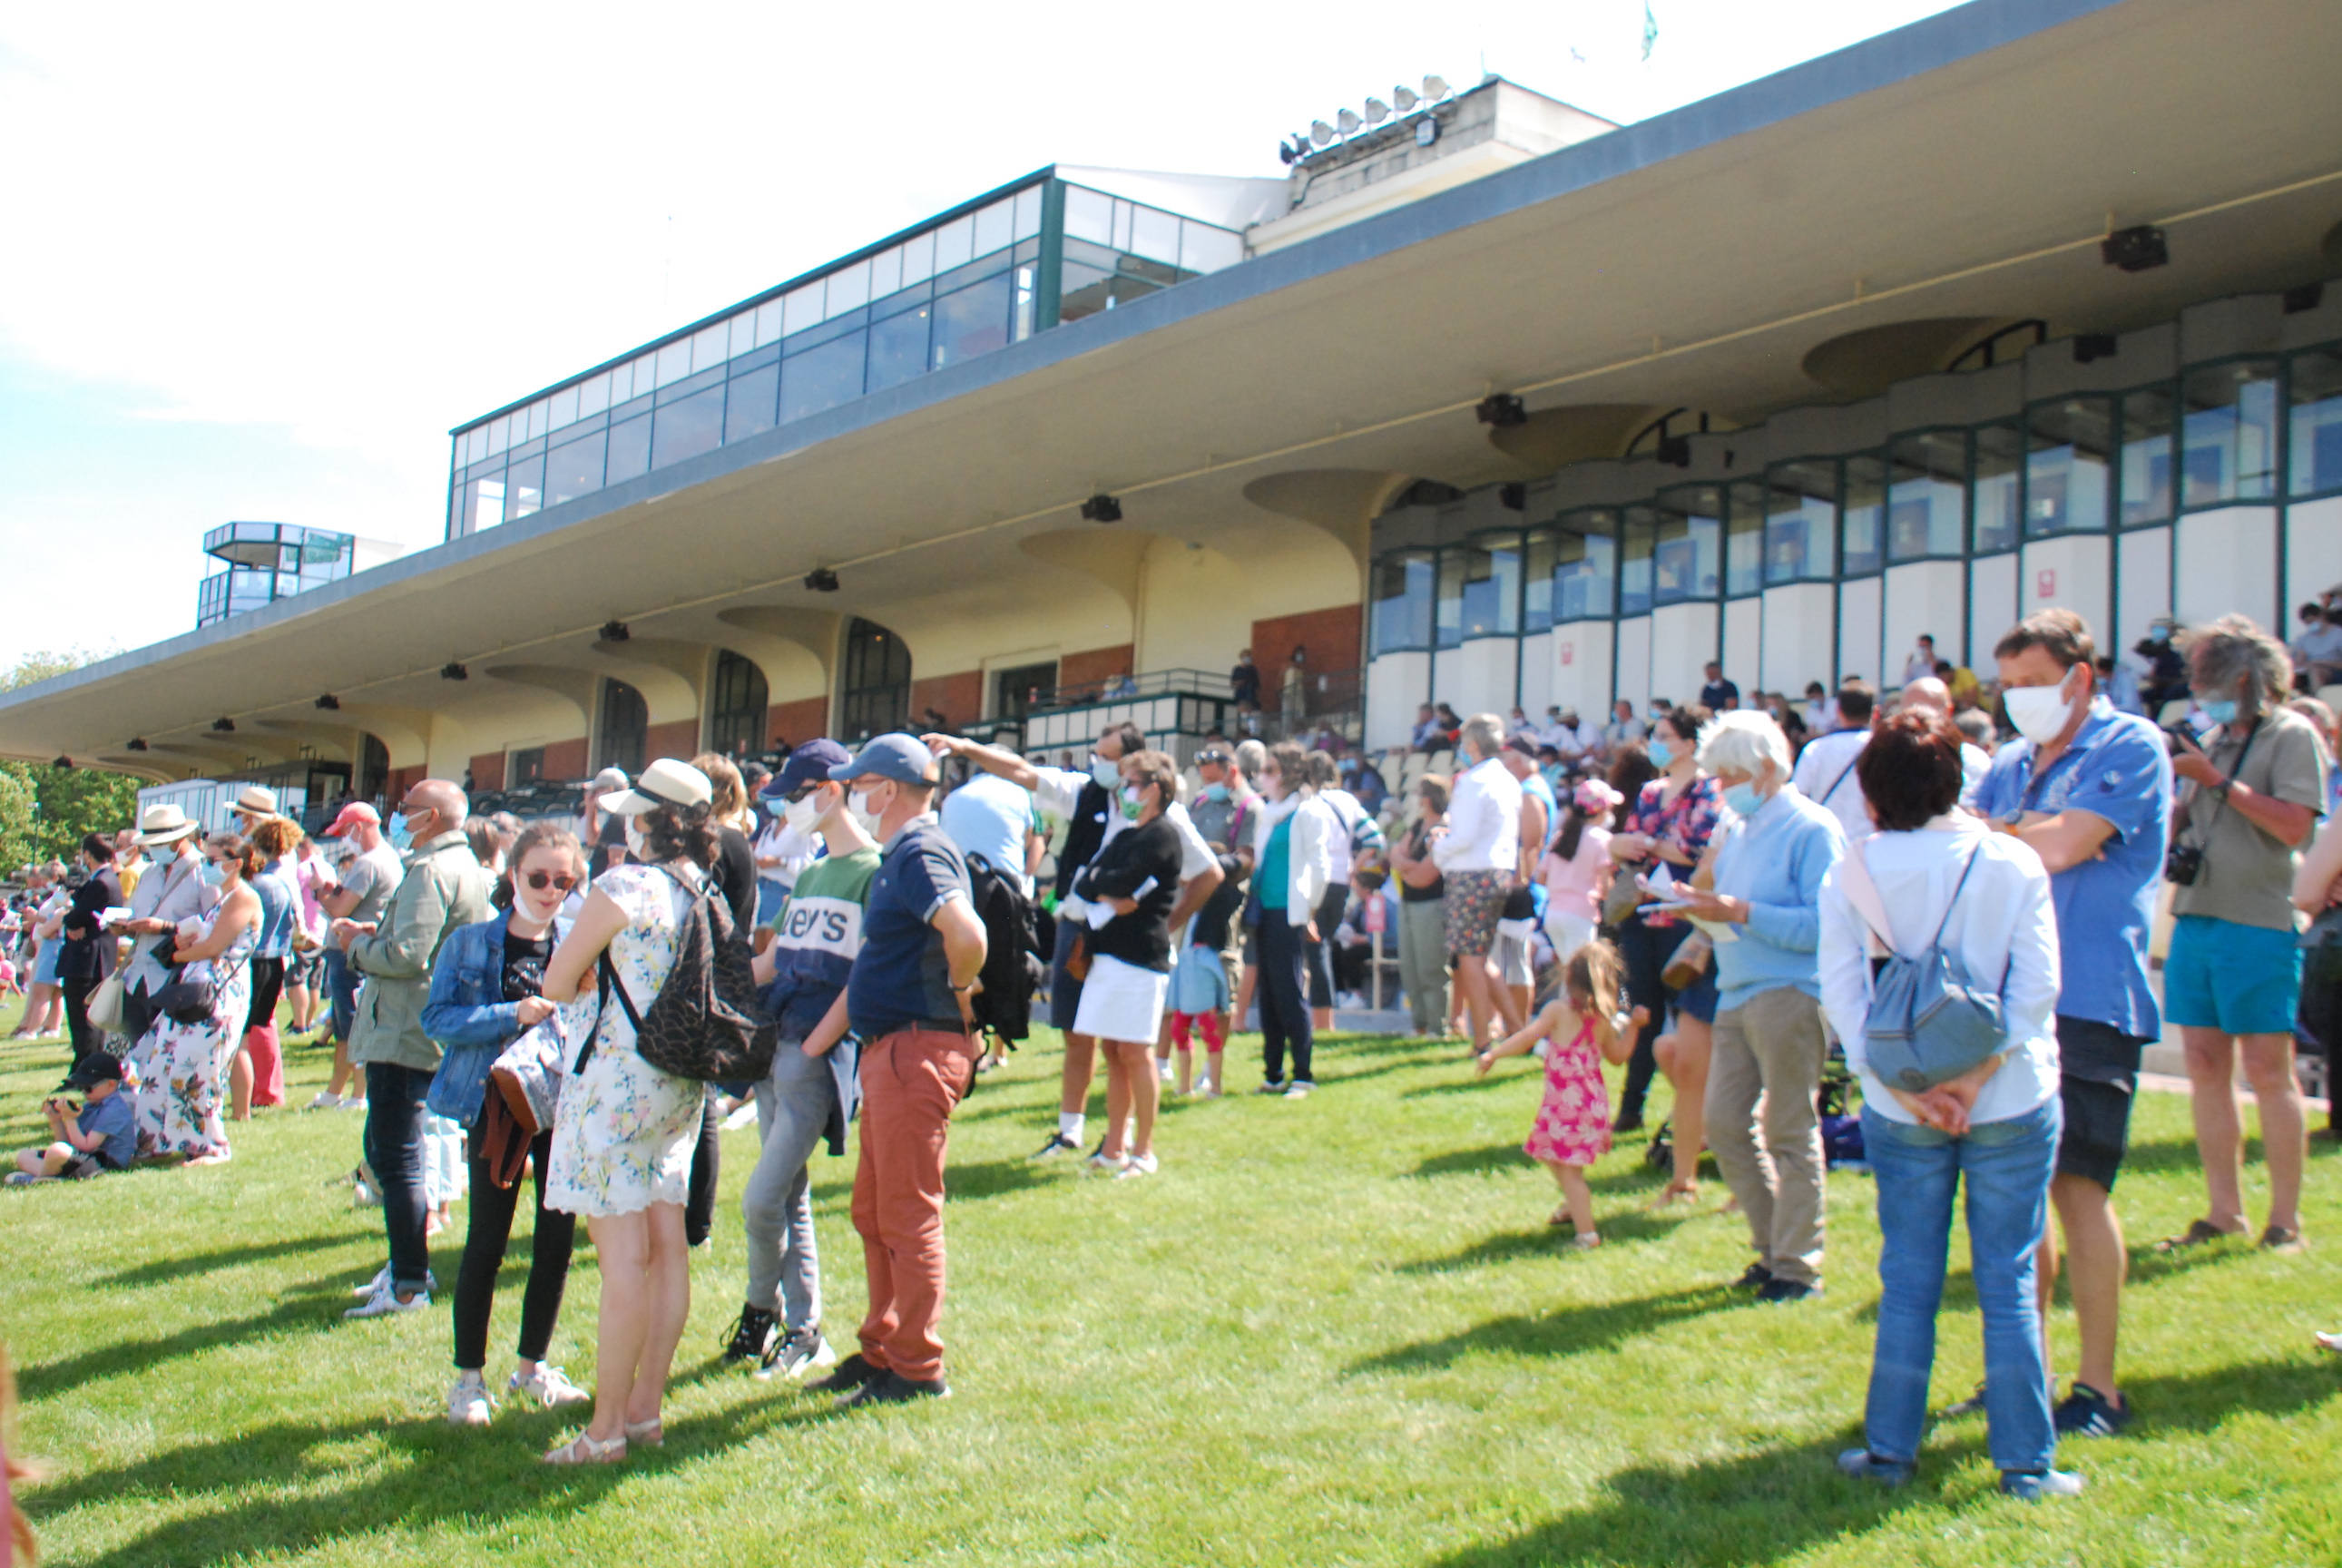 Back on track: Spectators in front of the stands for the Prix Jean Prat meeting at Deauville last Sunday. They were required to wear face masks as France reopened racecourses to the public. Photo: John Gilmore